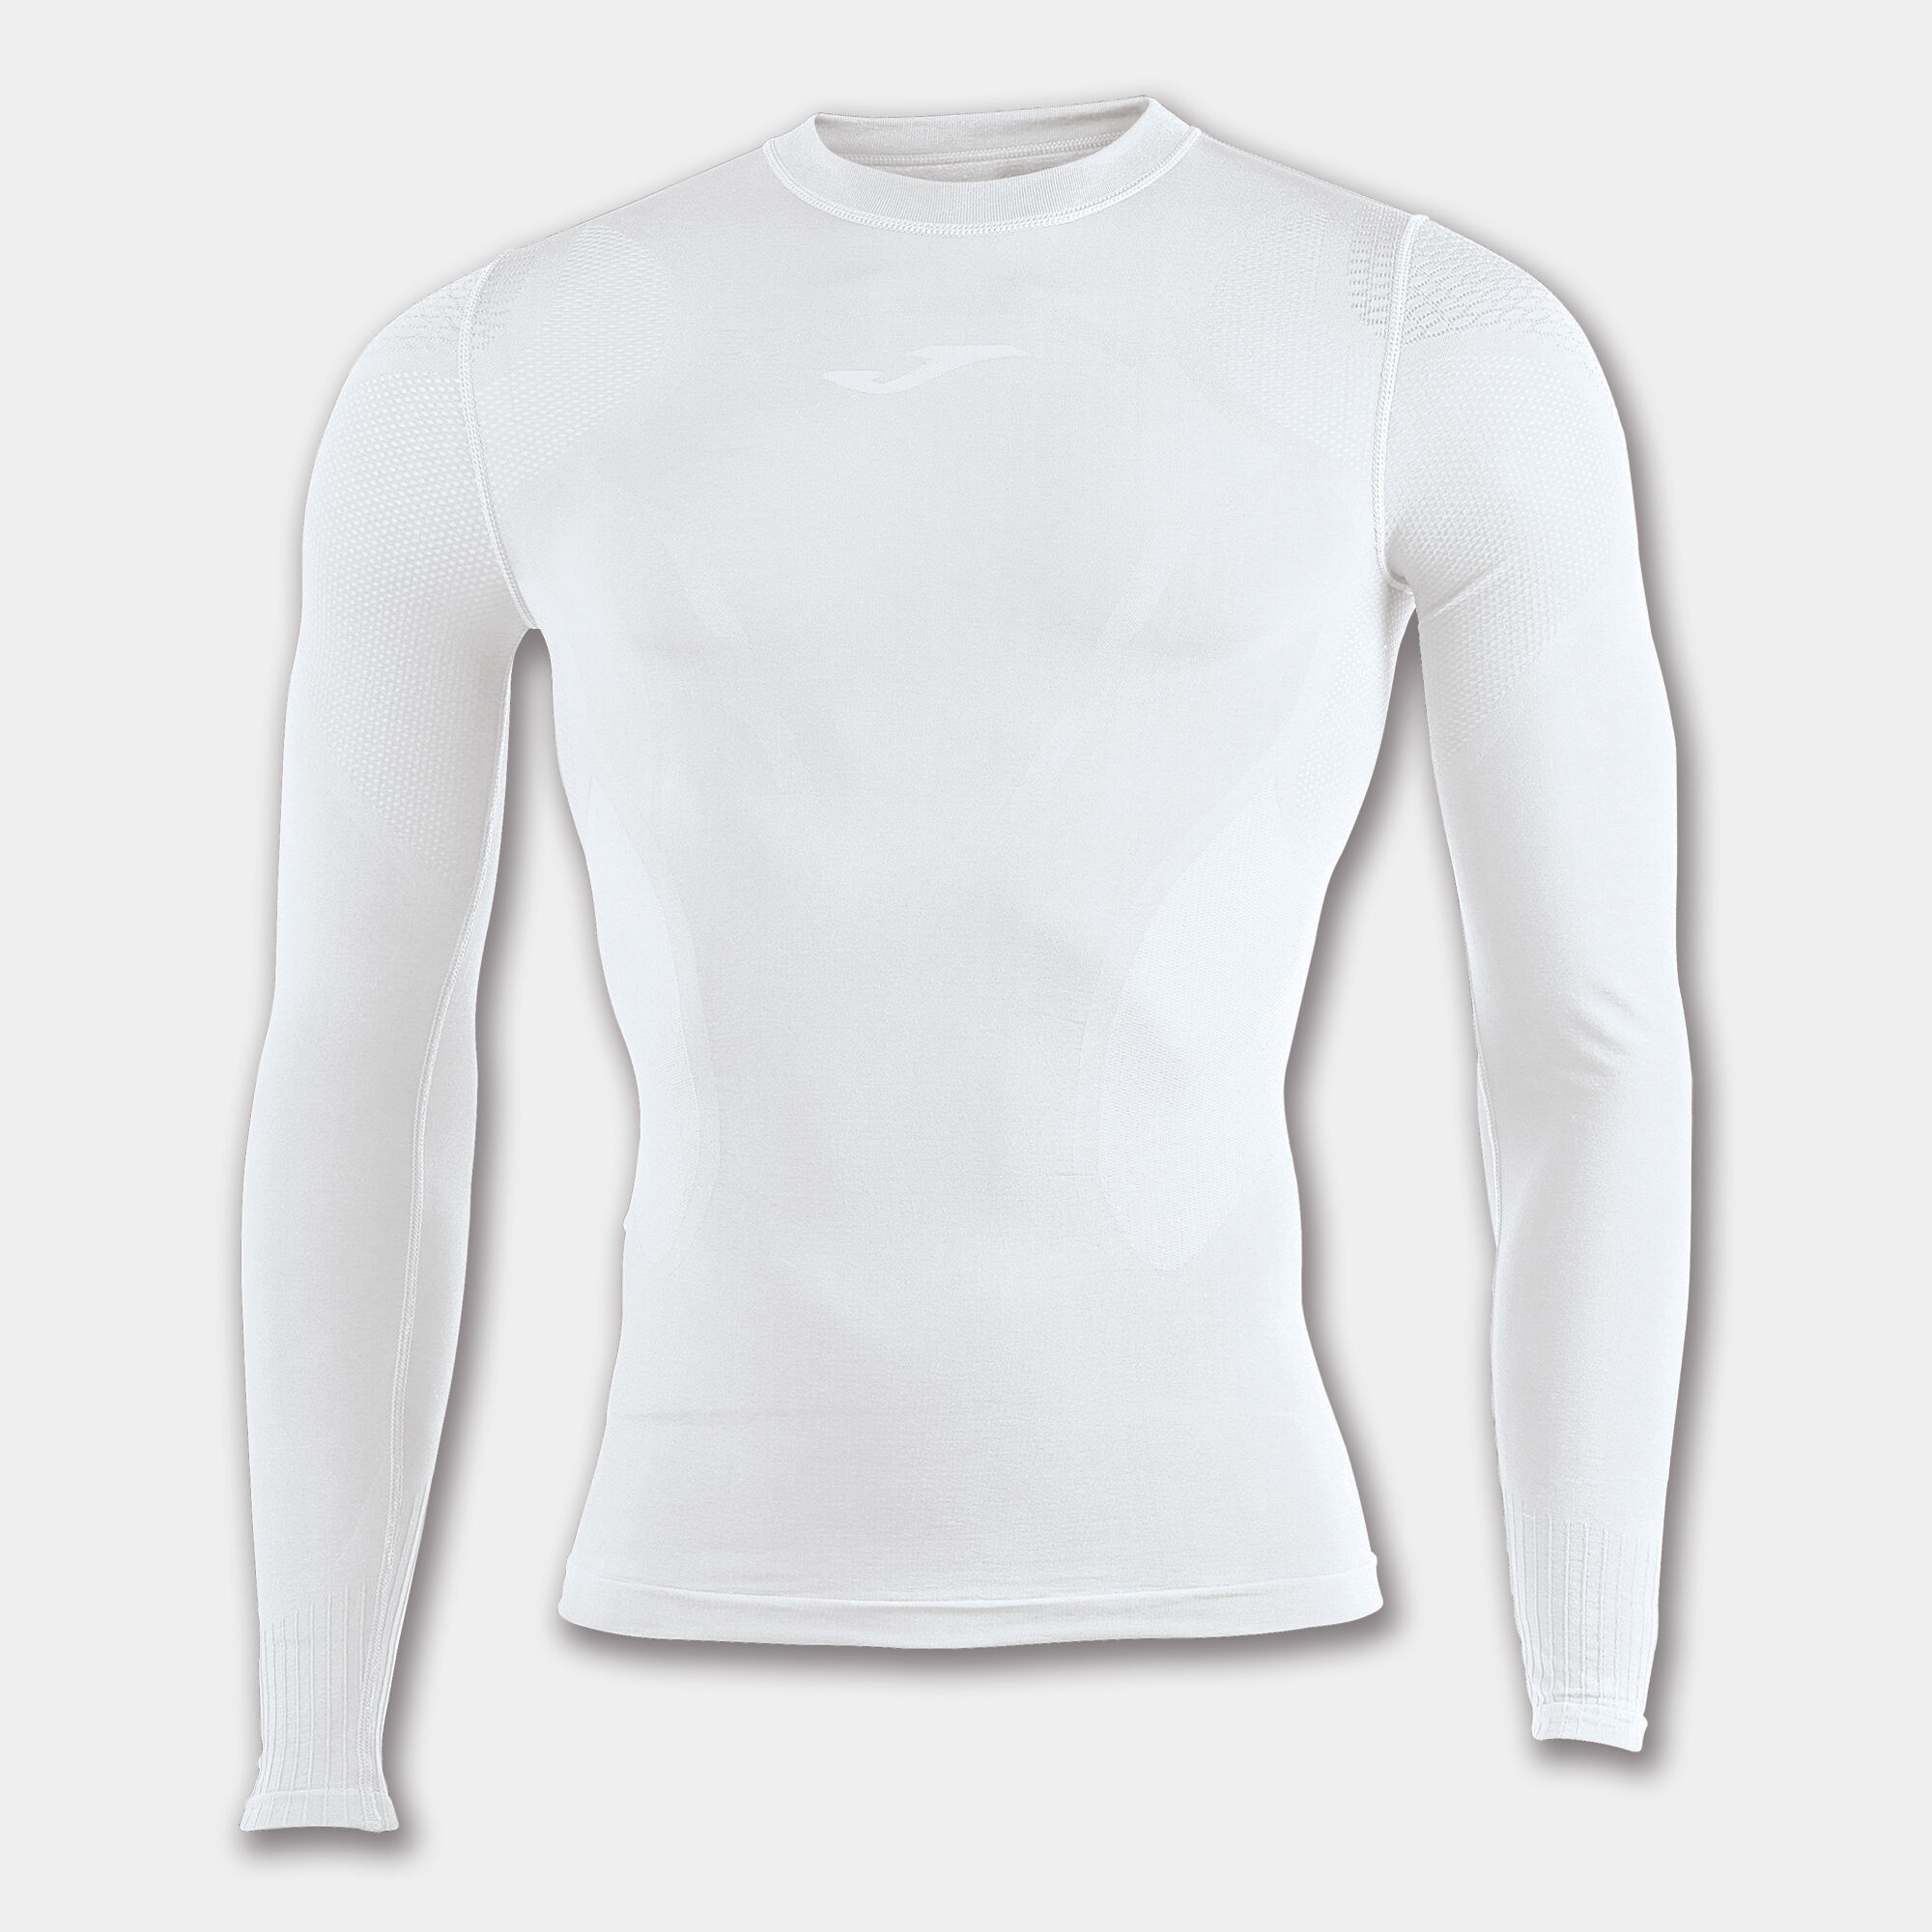 MAILLOT MANCHES LONGUES HOMME BRAMA EMOTION II BLANC